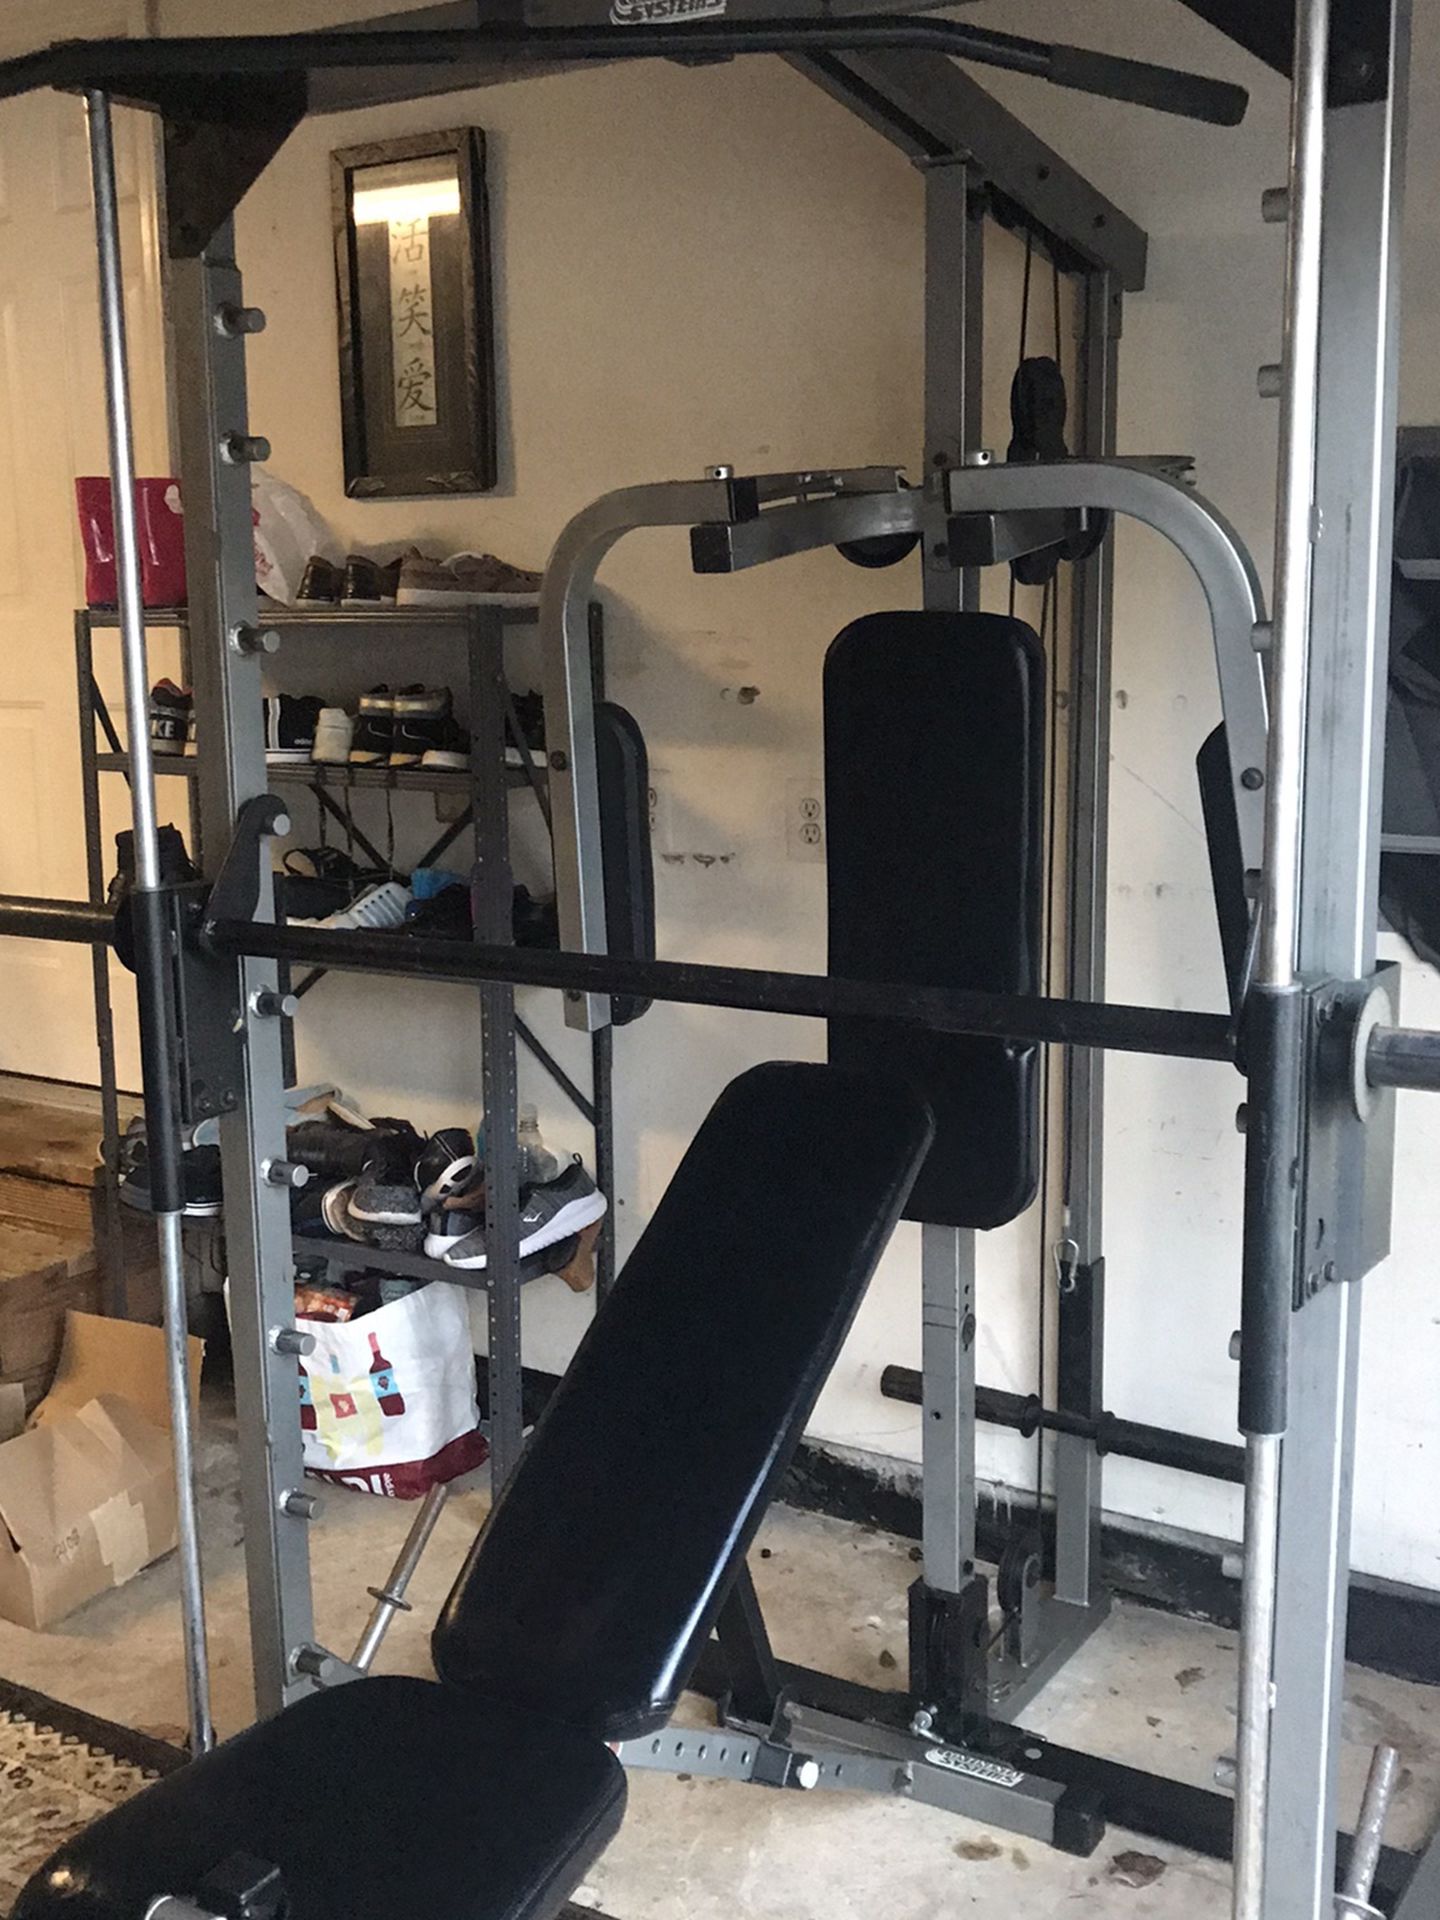 Smith Machine With Pulling System Cable And Adjustable Weight Bench